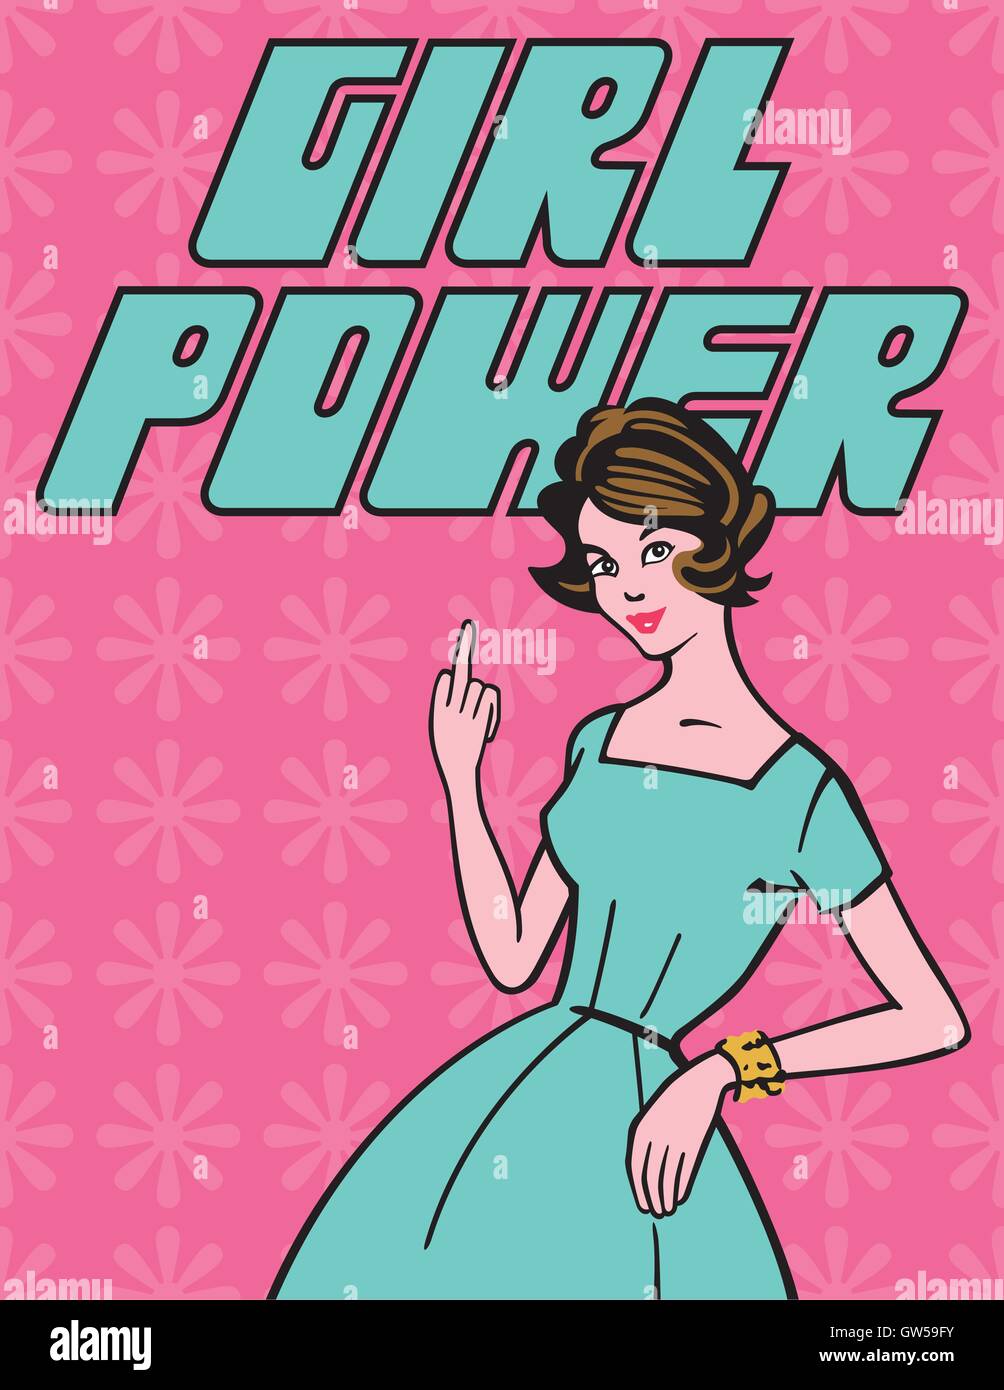 Girl Power Retro vector design. Classic 1950's housewife give the finger to the world. Cool retro graphics and decidedly modern attitude. You go girl! Stock Vector